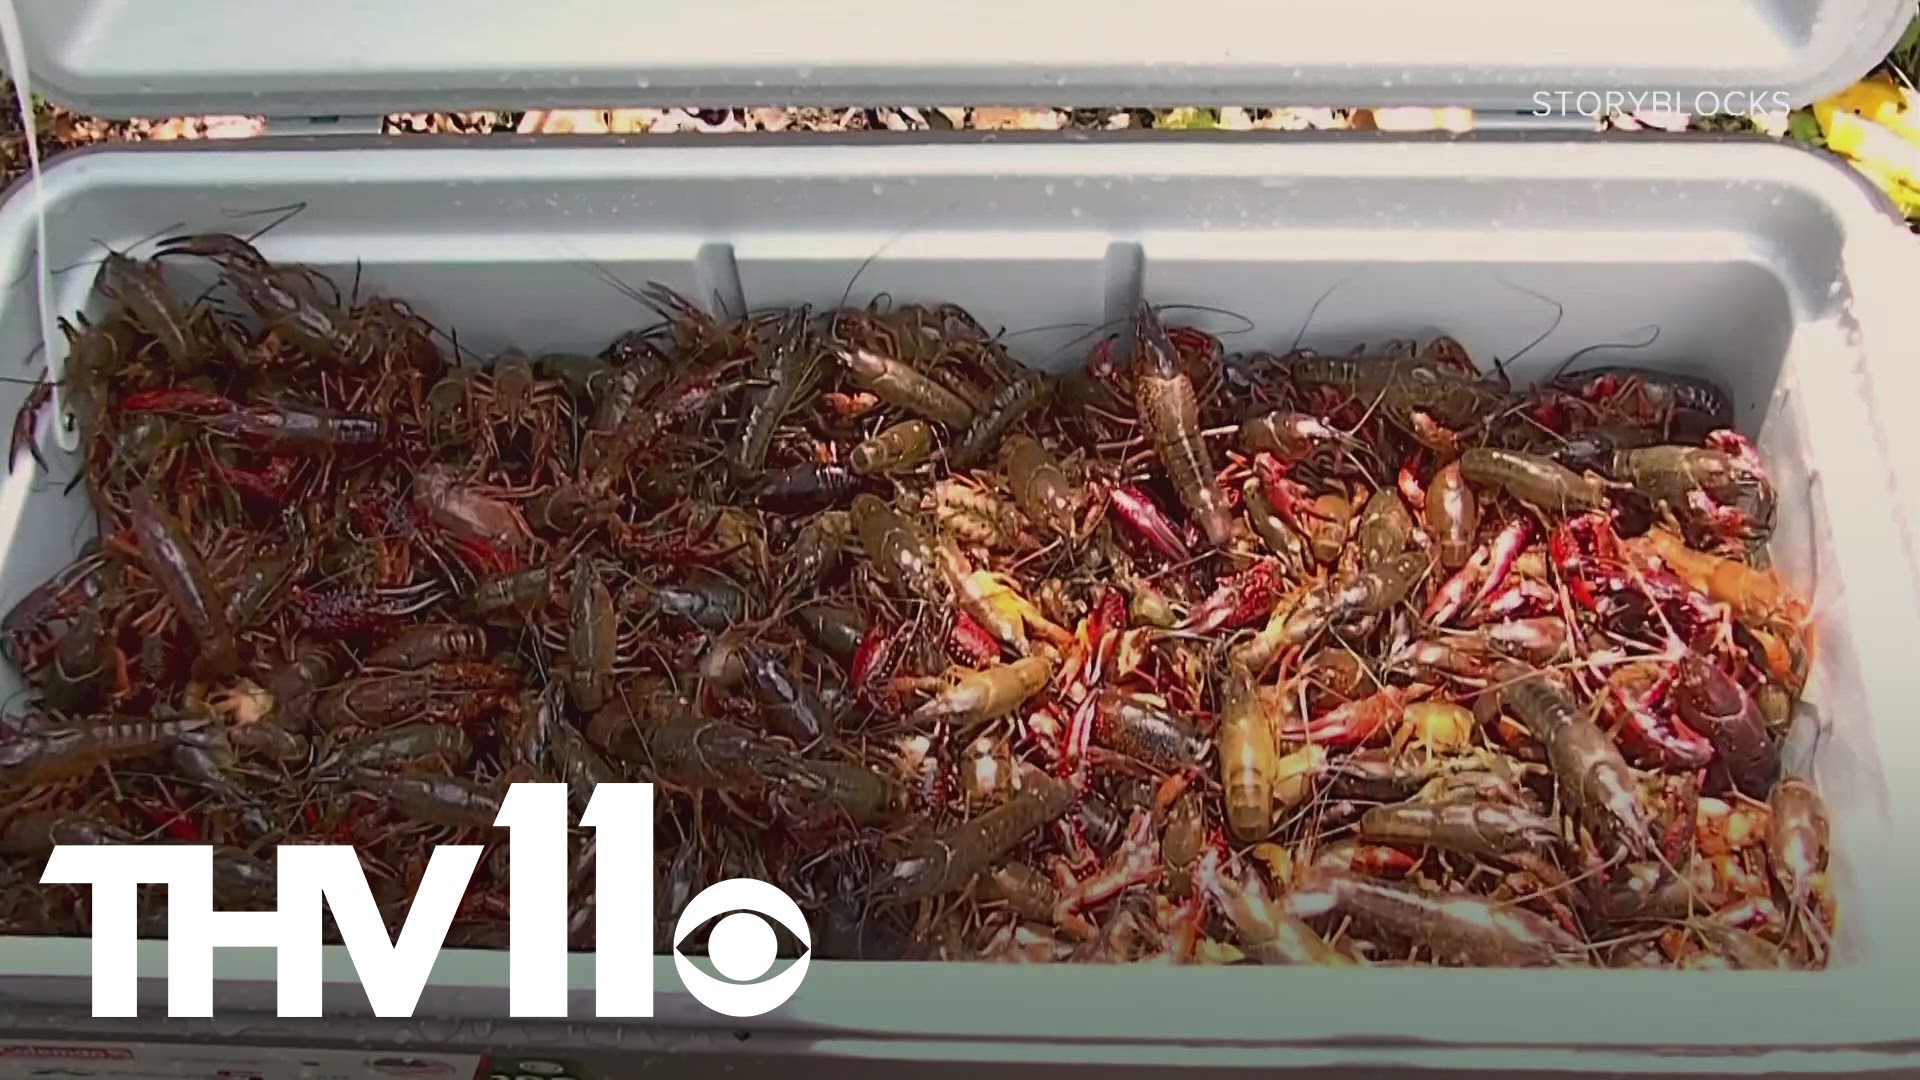 It's almost crawfish season, but this year you could probably expect to pay a higher price. A short supply of crawfish is impacting some local businesses.